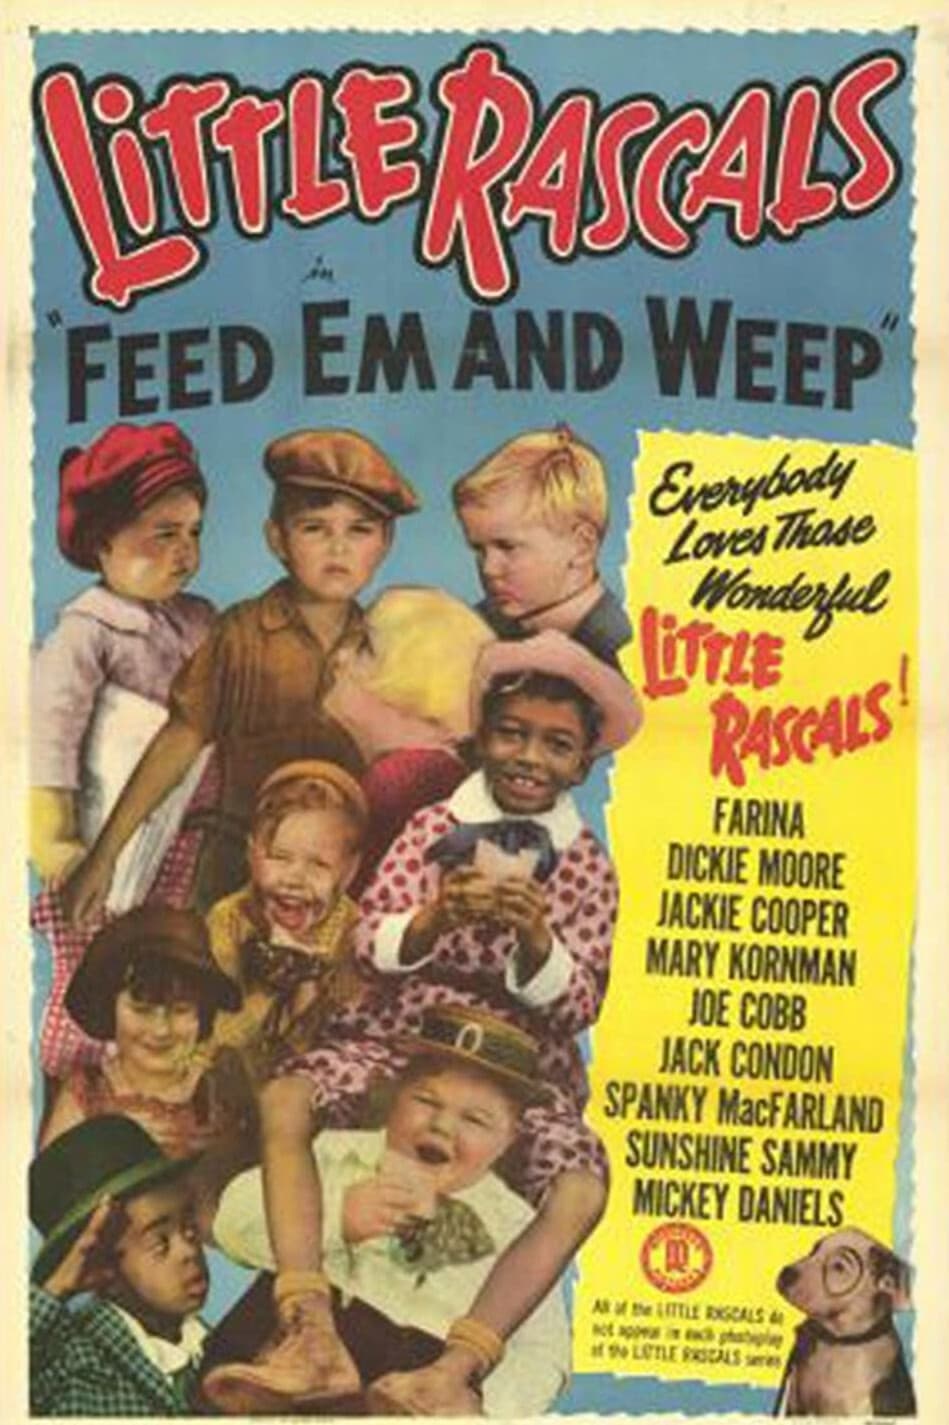 Feed 'em and Weep (1938)